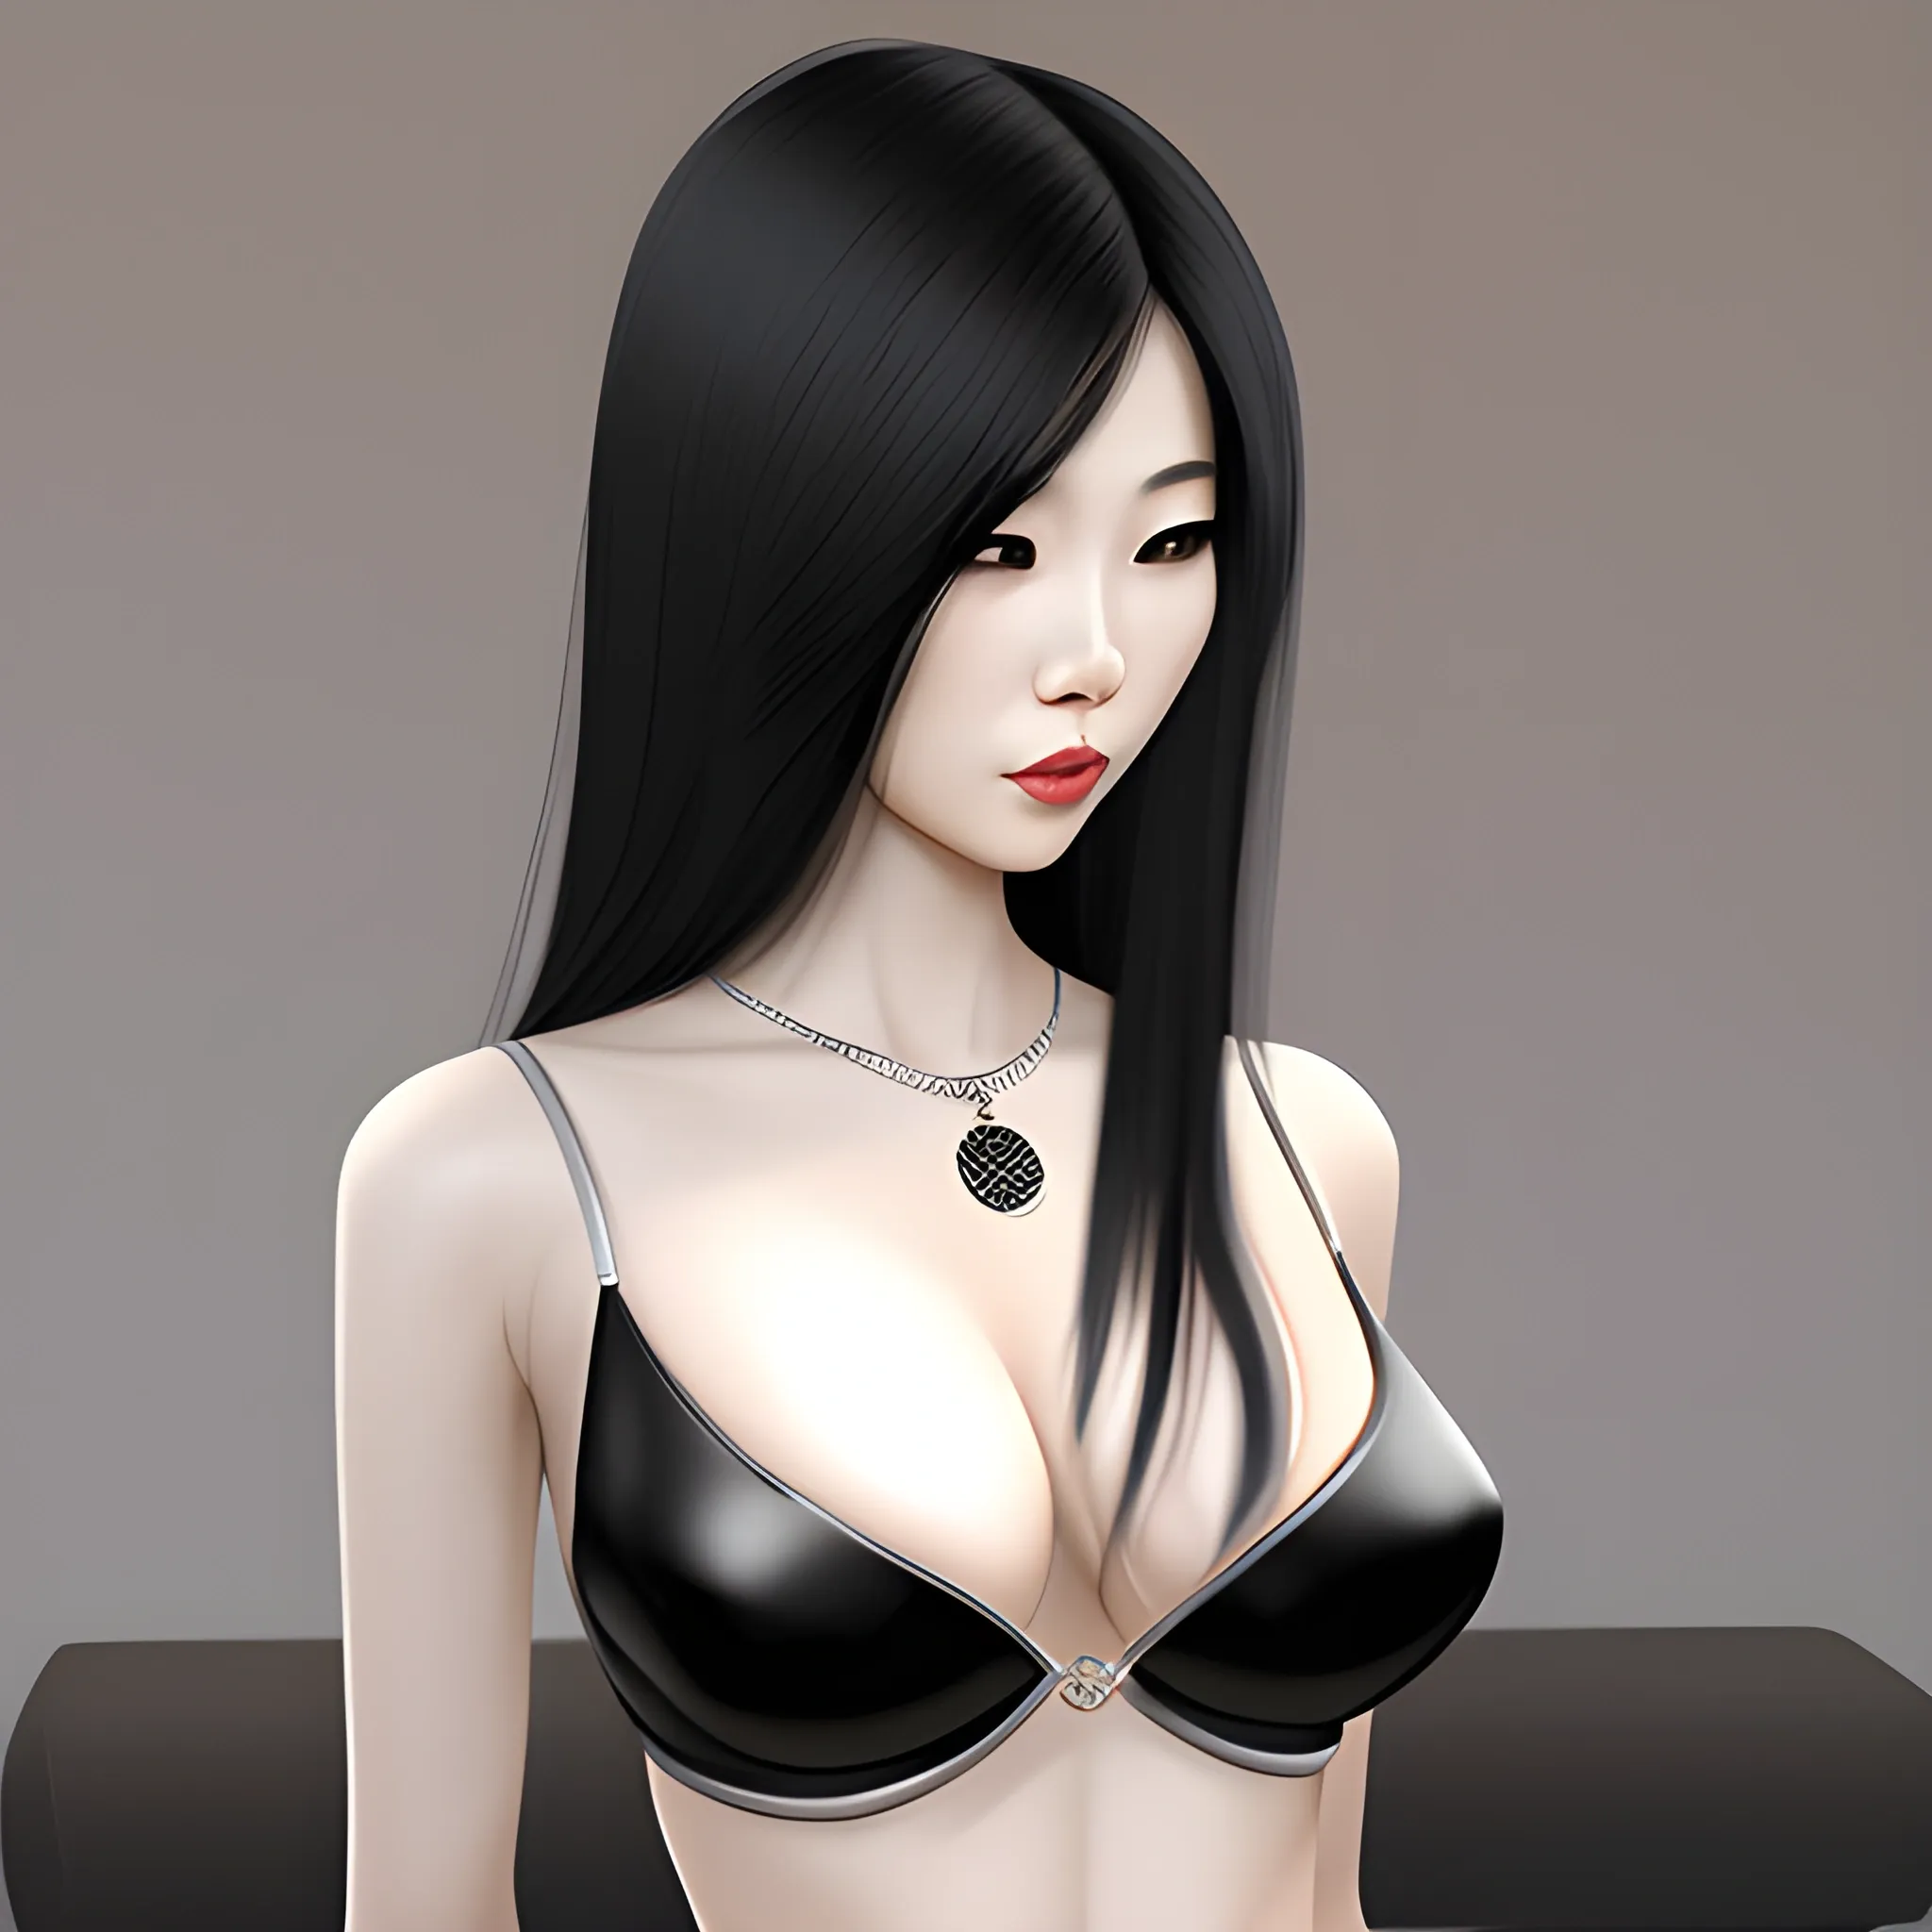 woman, asian factions, black straight hair, D cup breast, six pack, wide hips, black elegant dress, black heels, silver bangles, silver necklace, photorealistic